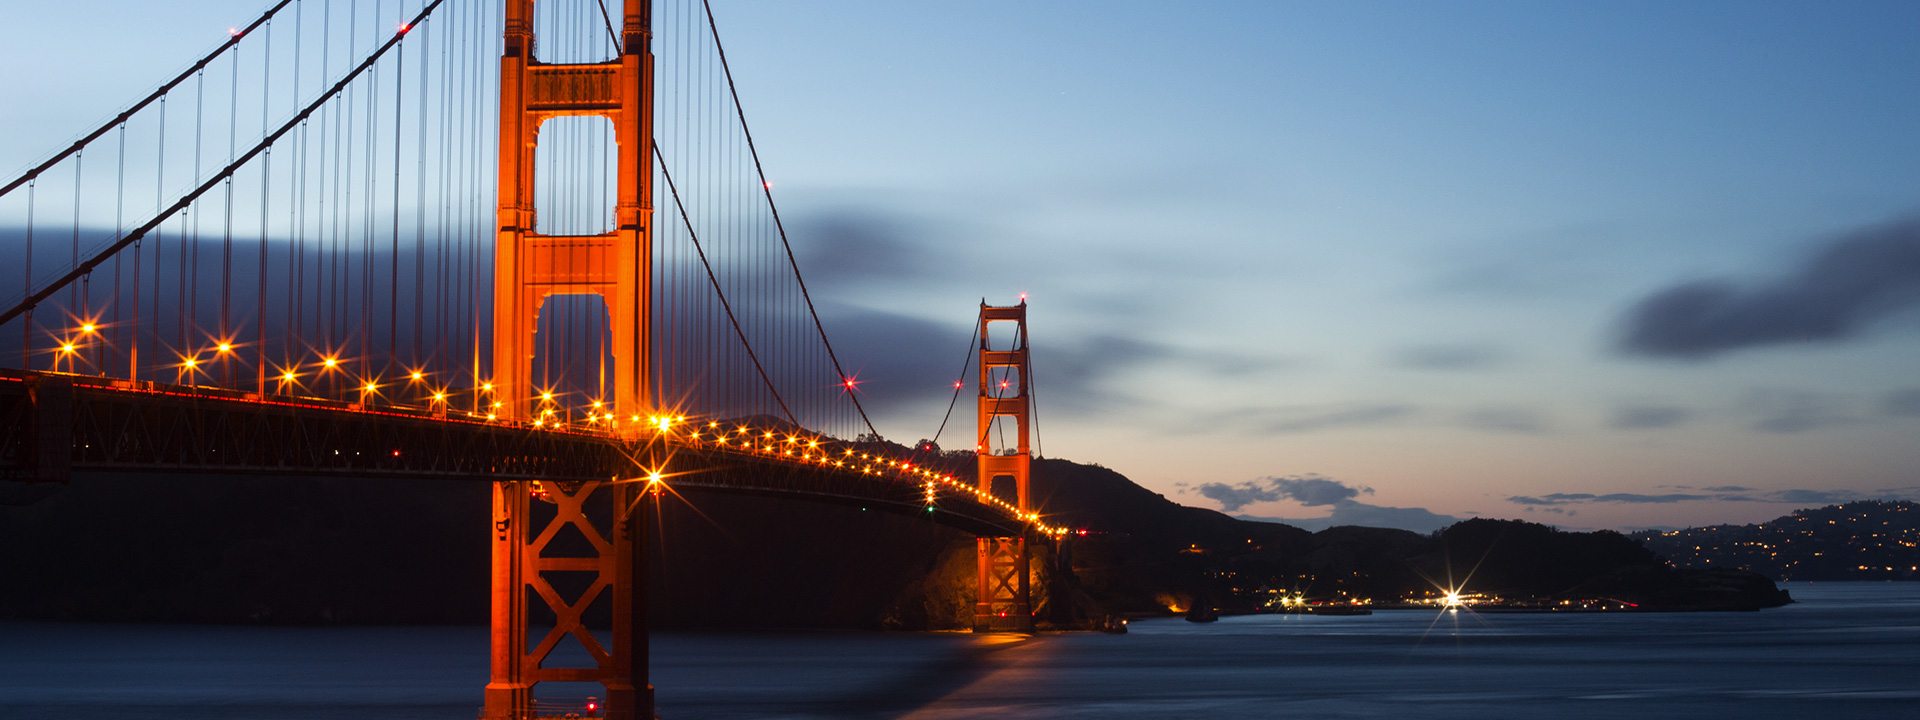 Things to do in San Francisco at Night